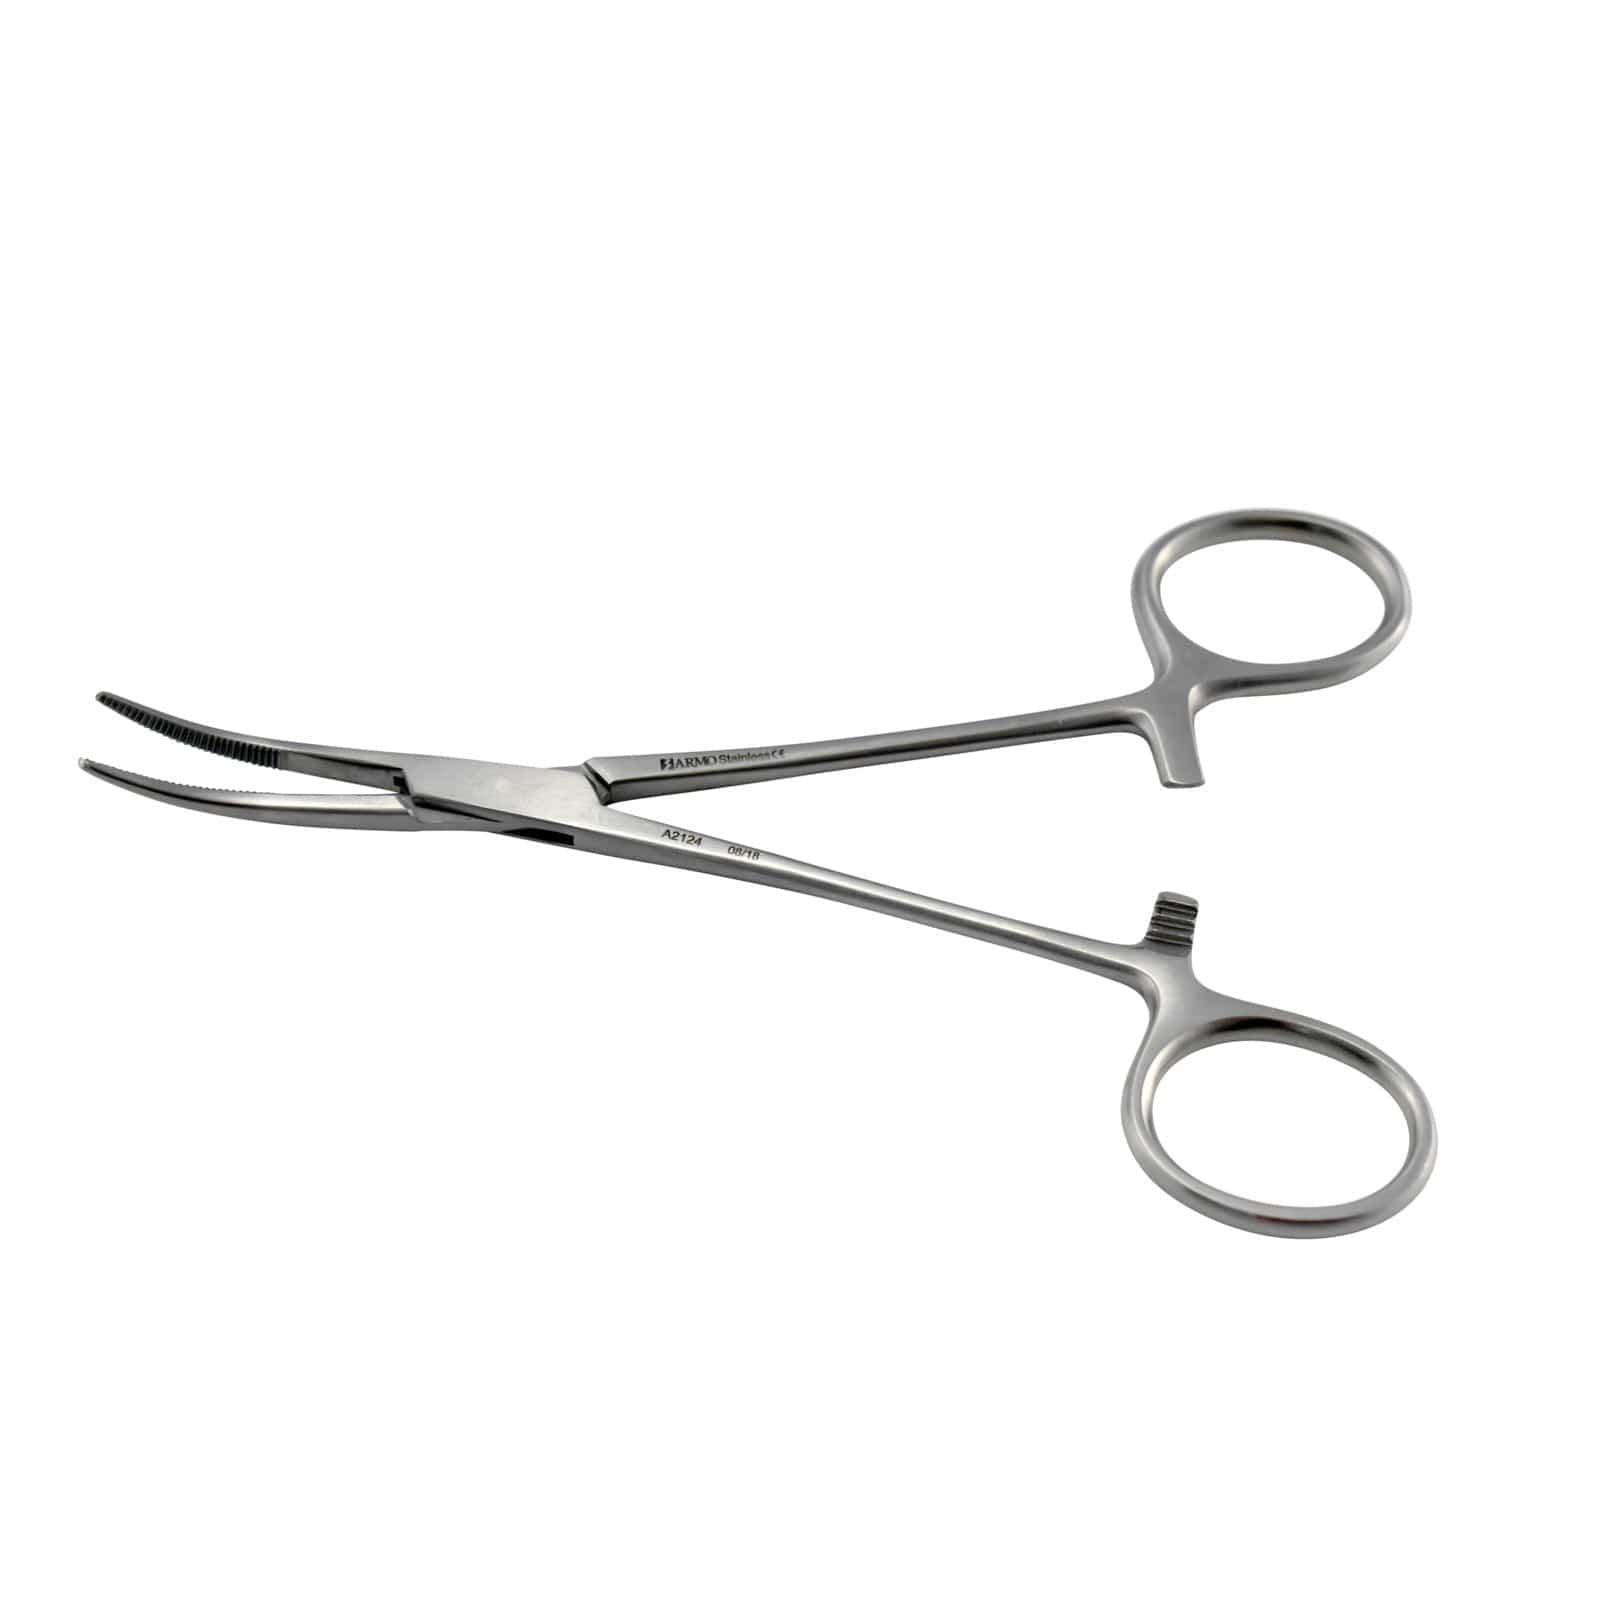 Armo Surgical Instruments 14cm / Curved Armo Kelly Artery Forceps